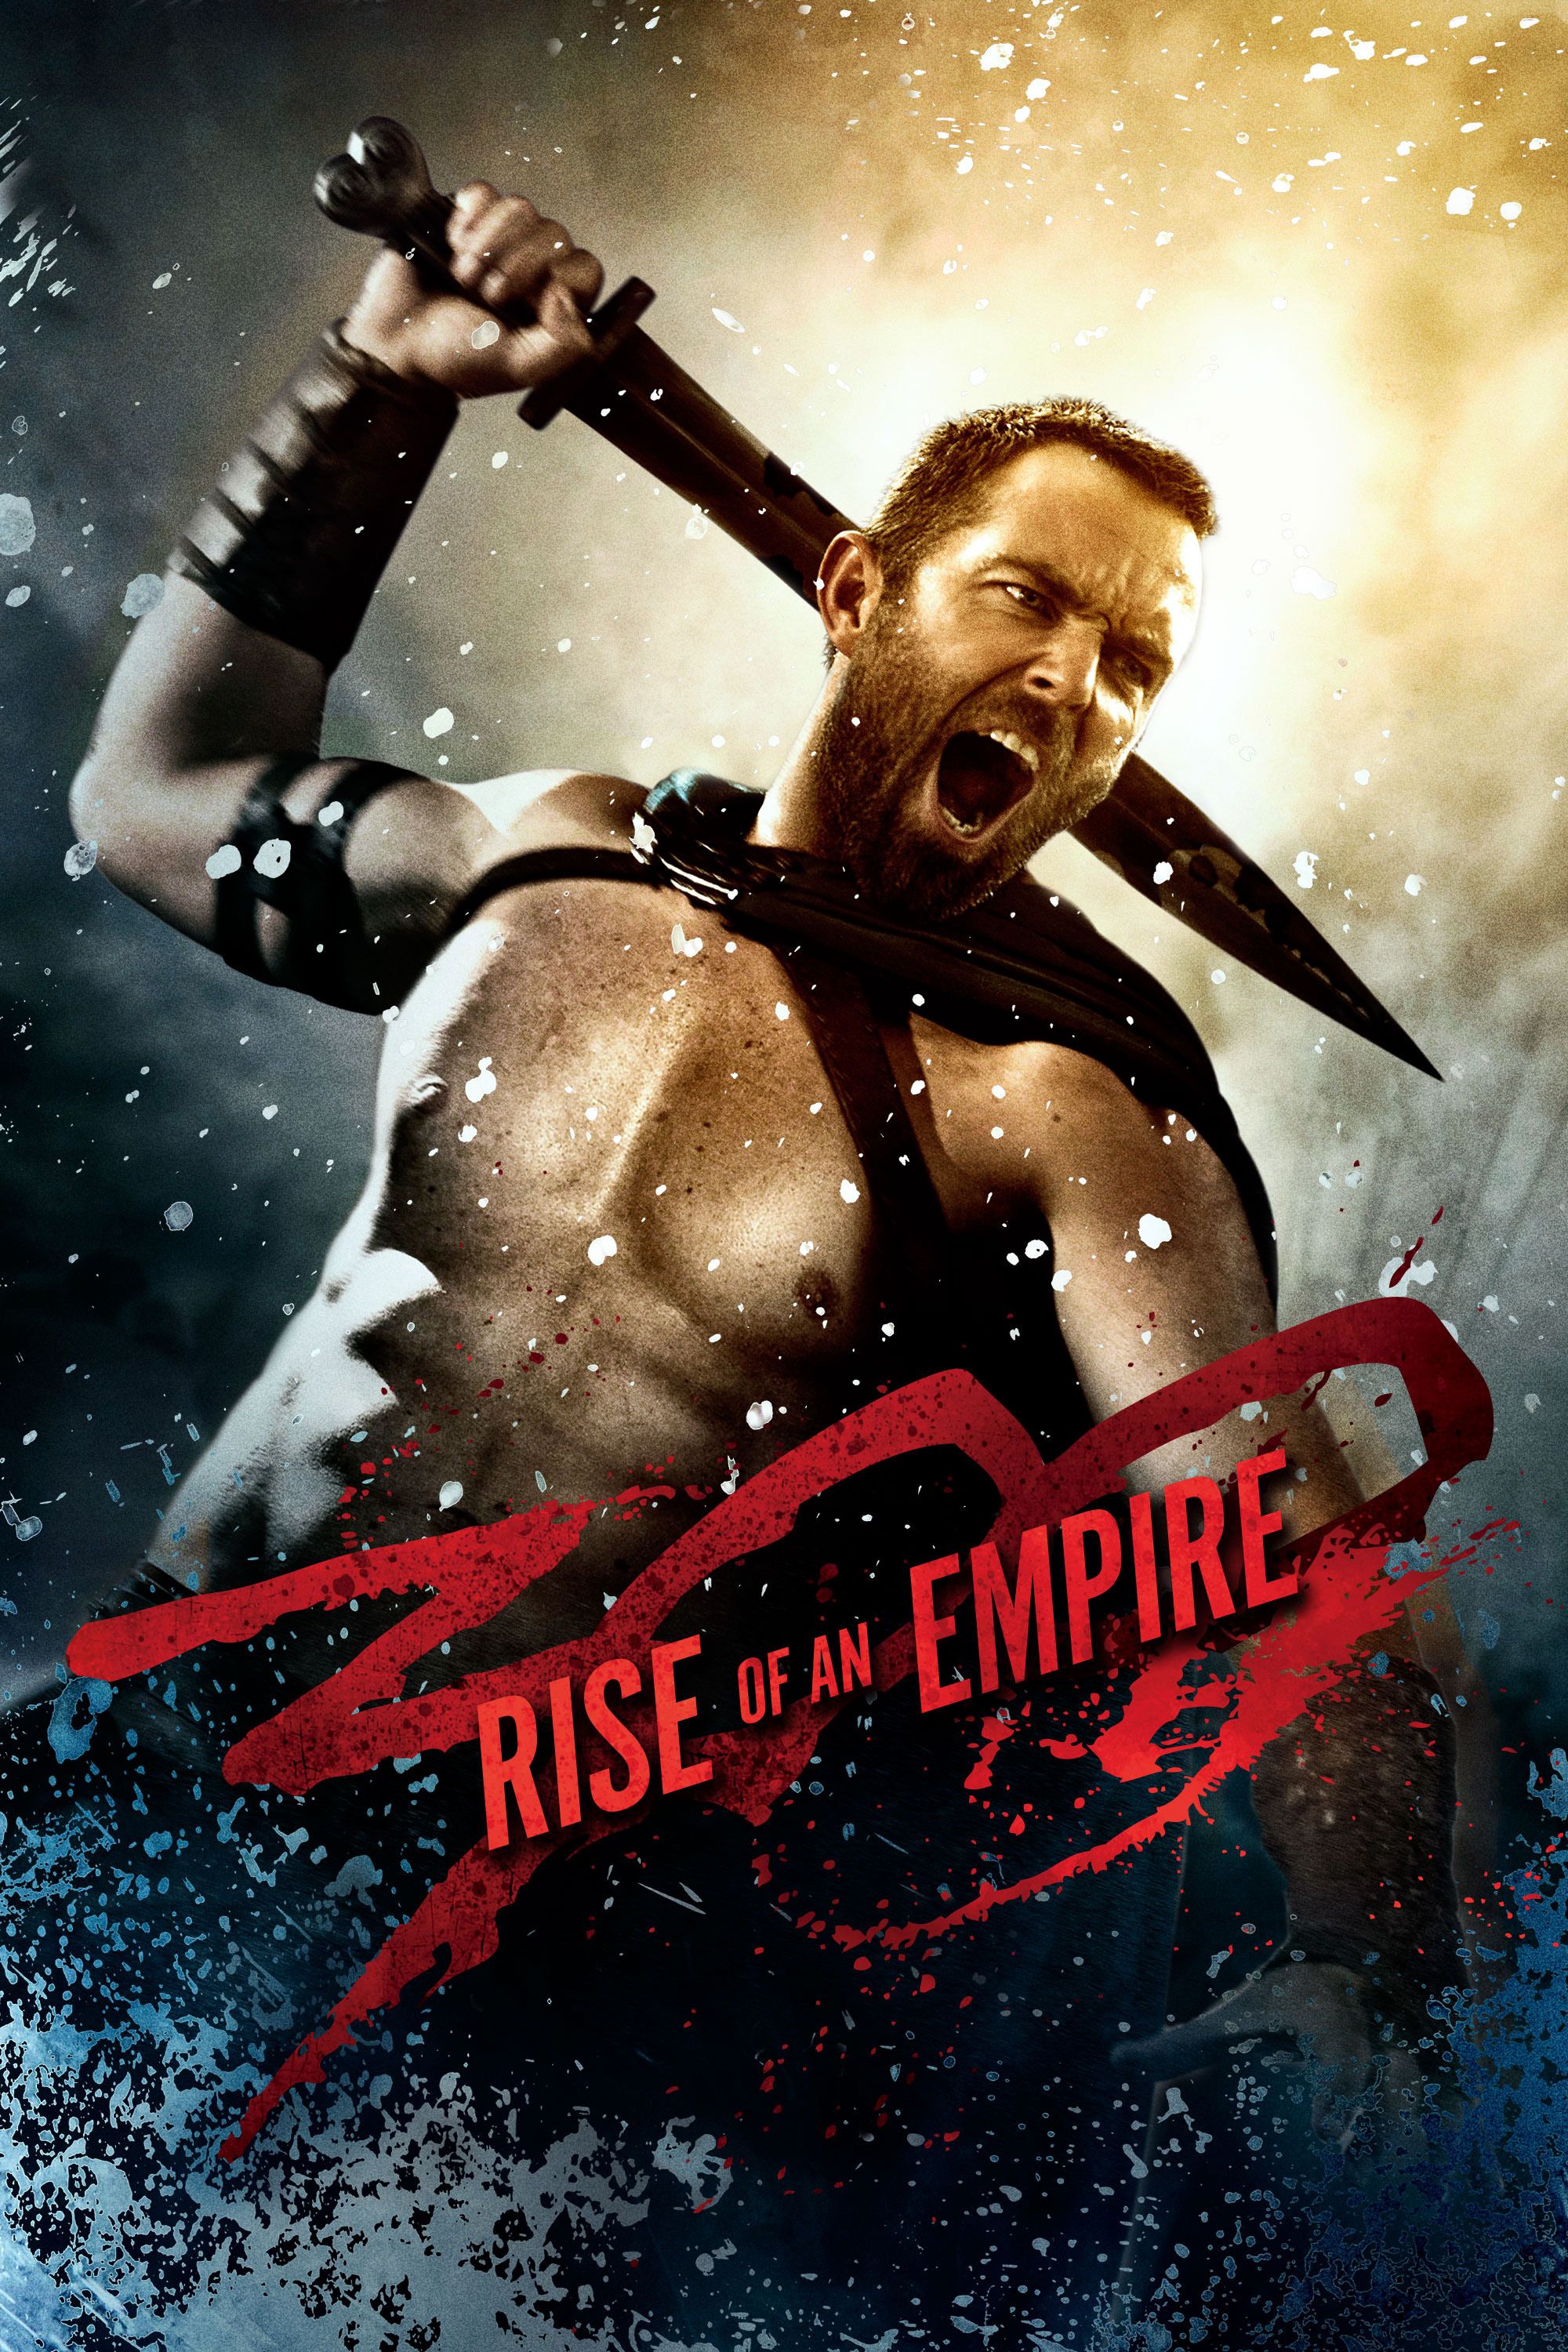 download 300 rise of an empire movie subtitle 1080p